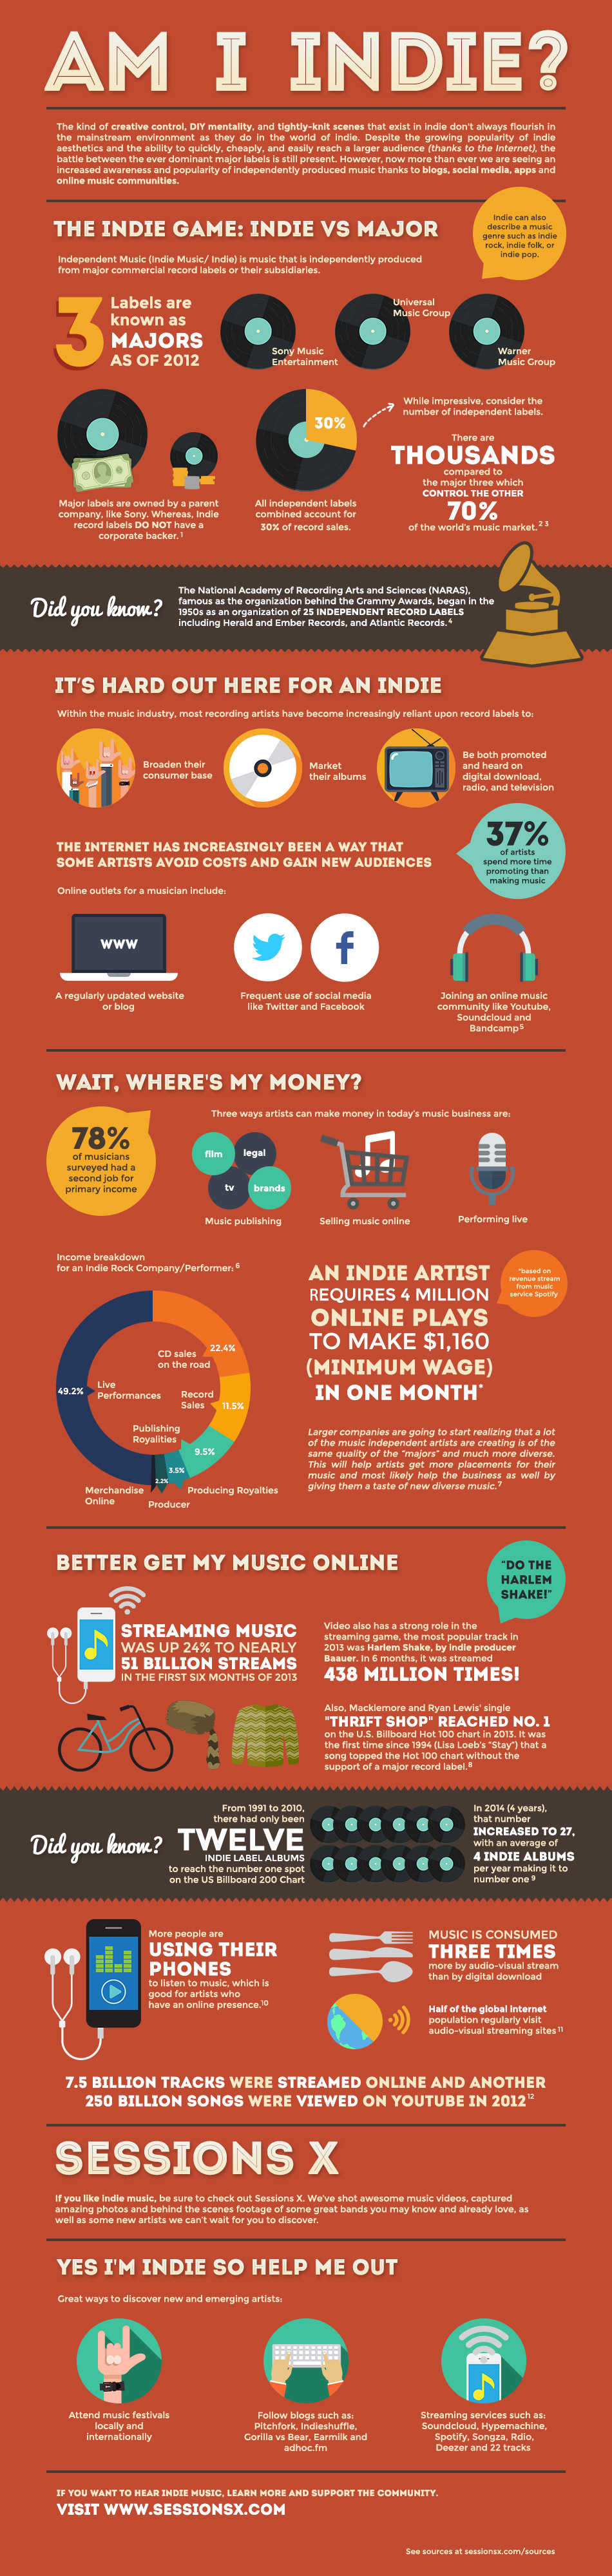 What is Indie Music and How Do You Define It?